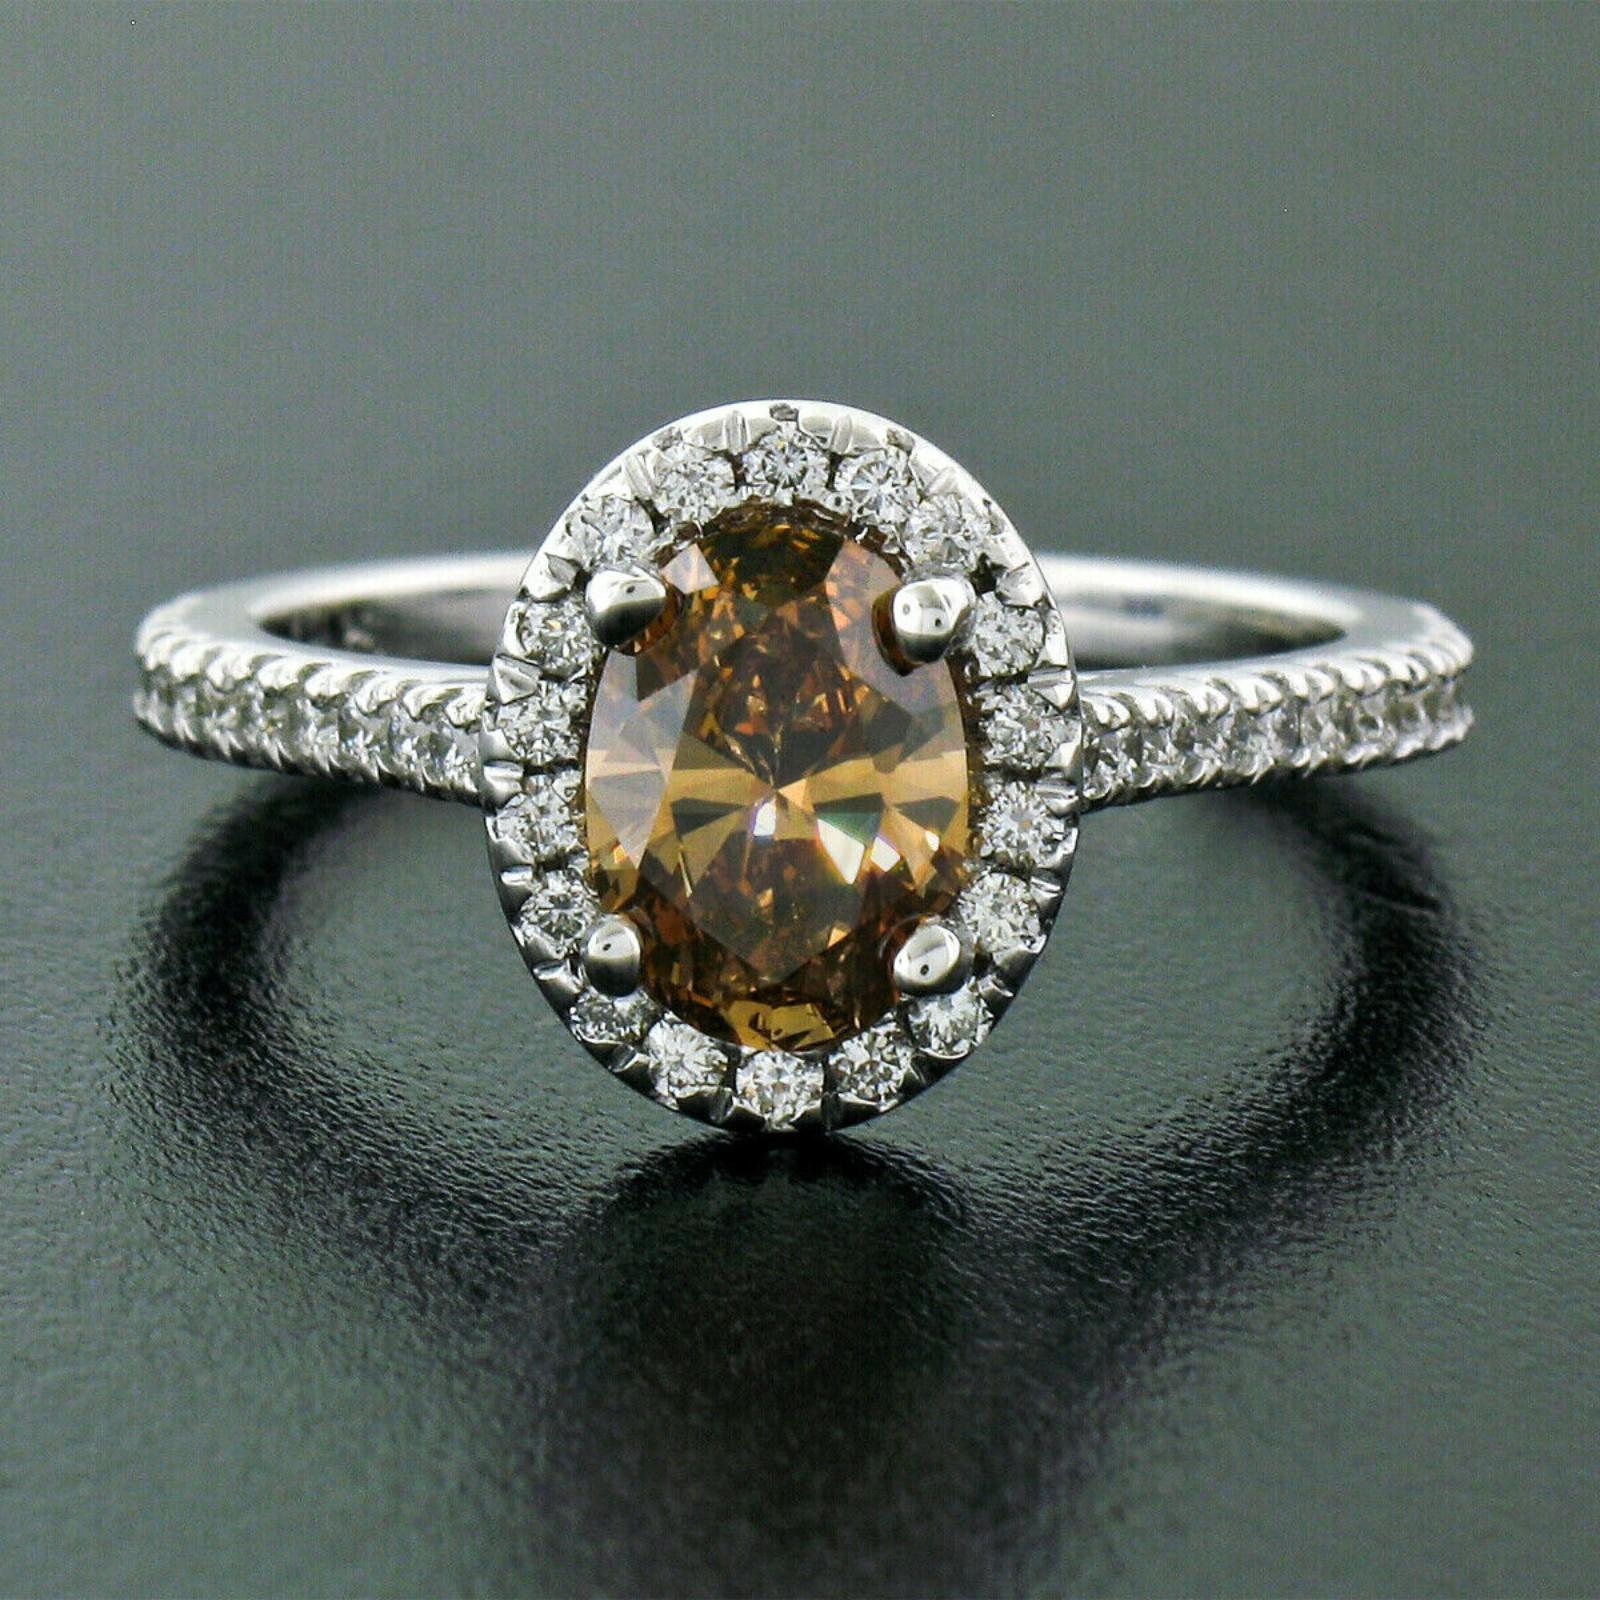 This gorgeous diamond engagement ring is newly crafted in solid 14k white gold and features an amazing, 1.00 carat, GIA certified oval brilliant cut diamond prong set at its center. The center stone is a natural, fancy brown-orange color and is very